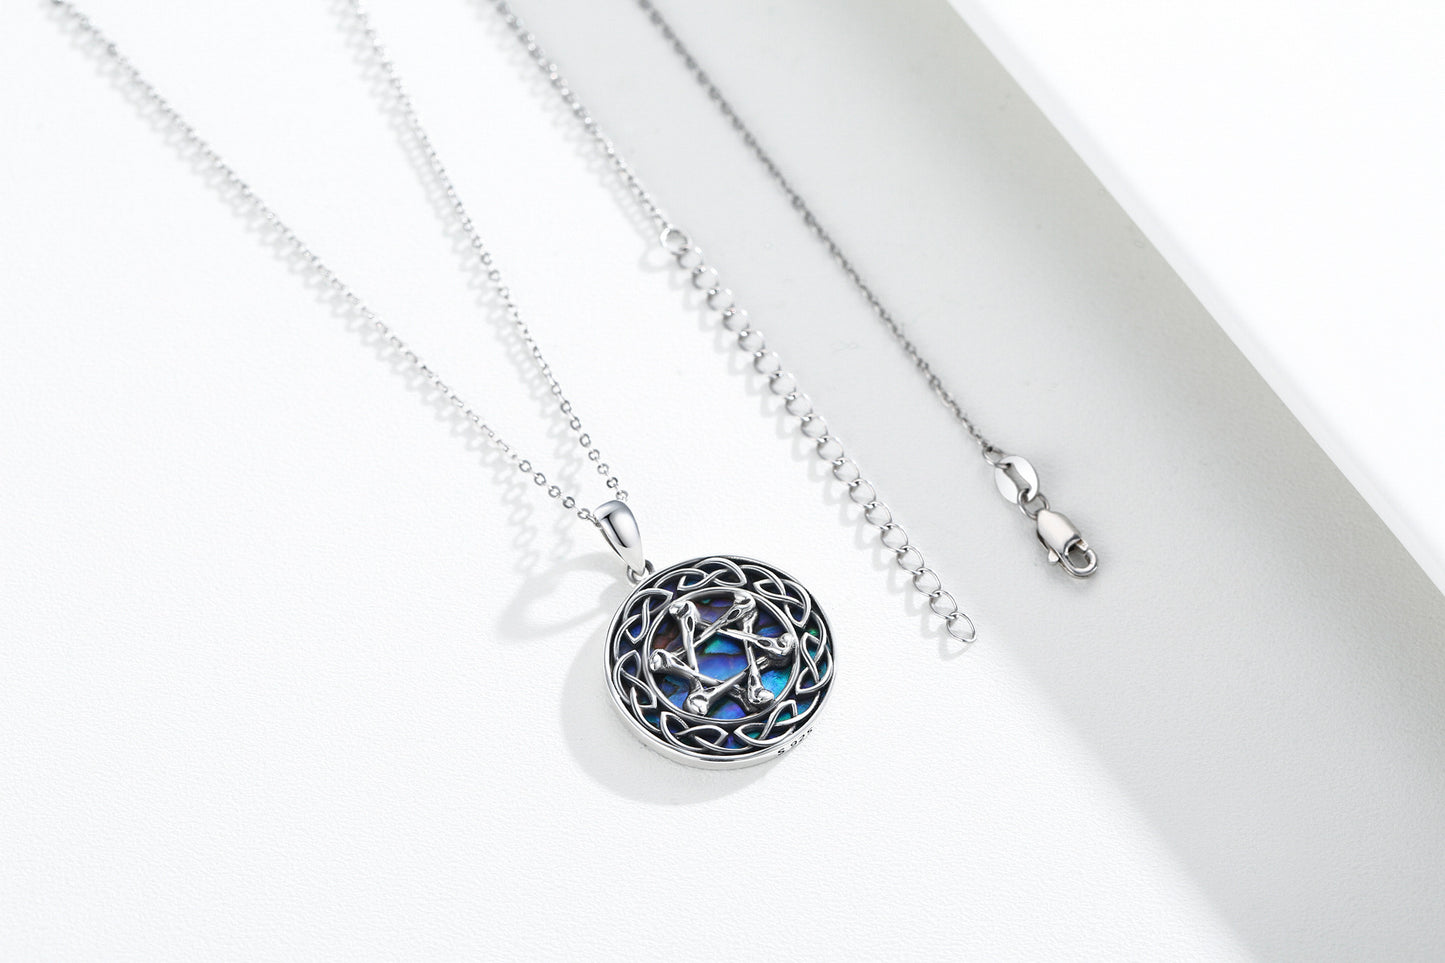 Celtic Knot Necklace 925 Sterling Silver Abalone Star of David Pendant Necklace for Women Jewish Amulet Jewellery Accessory